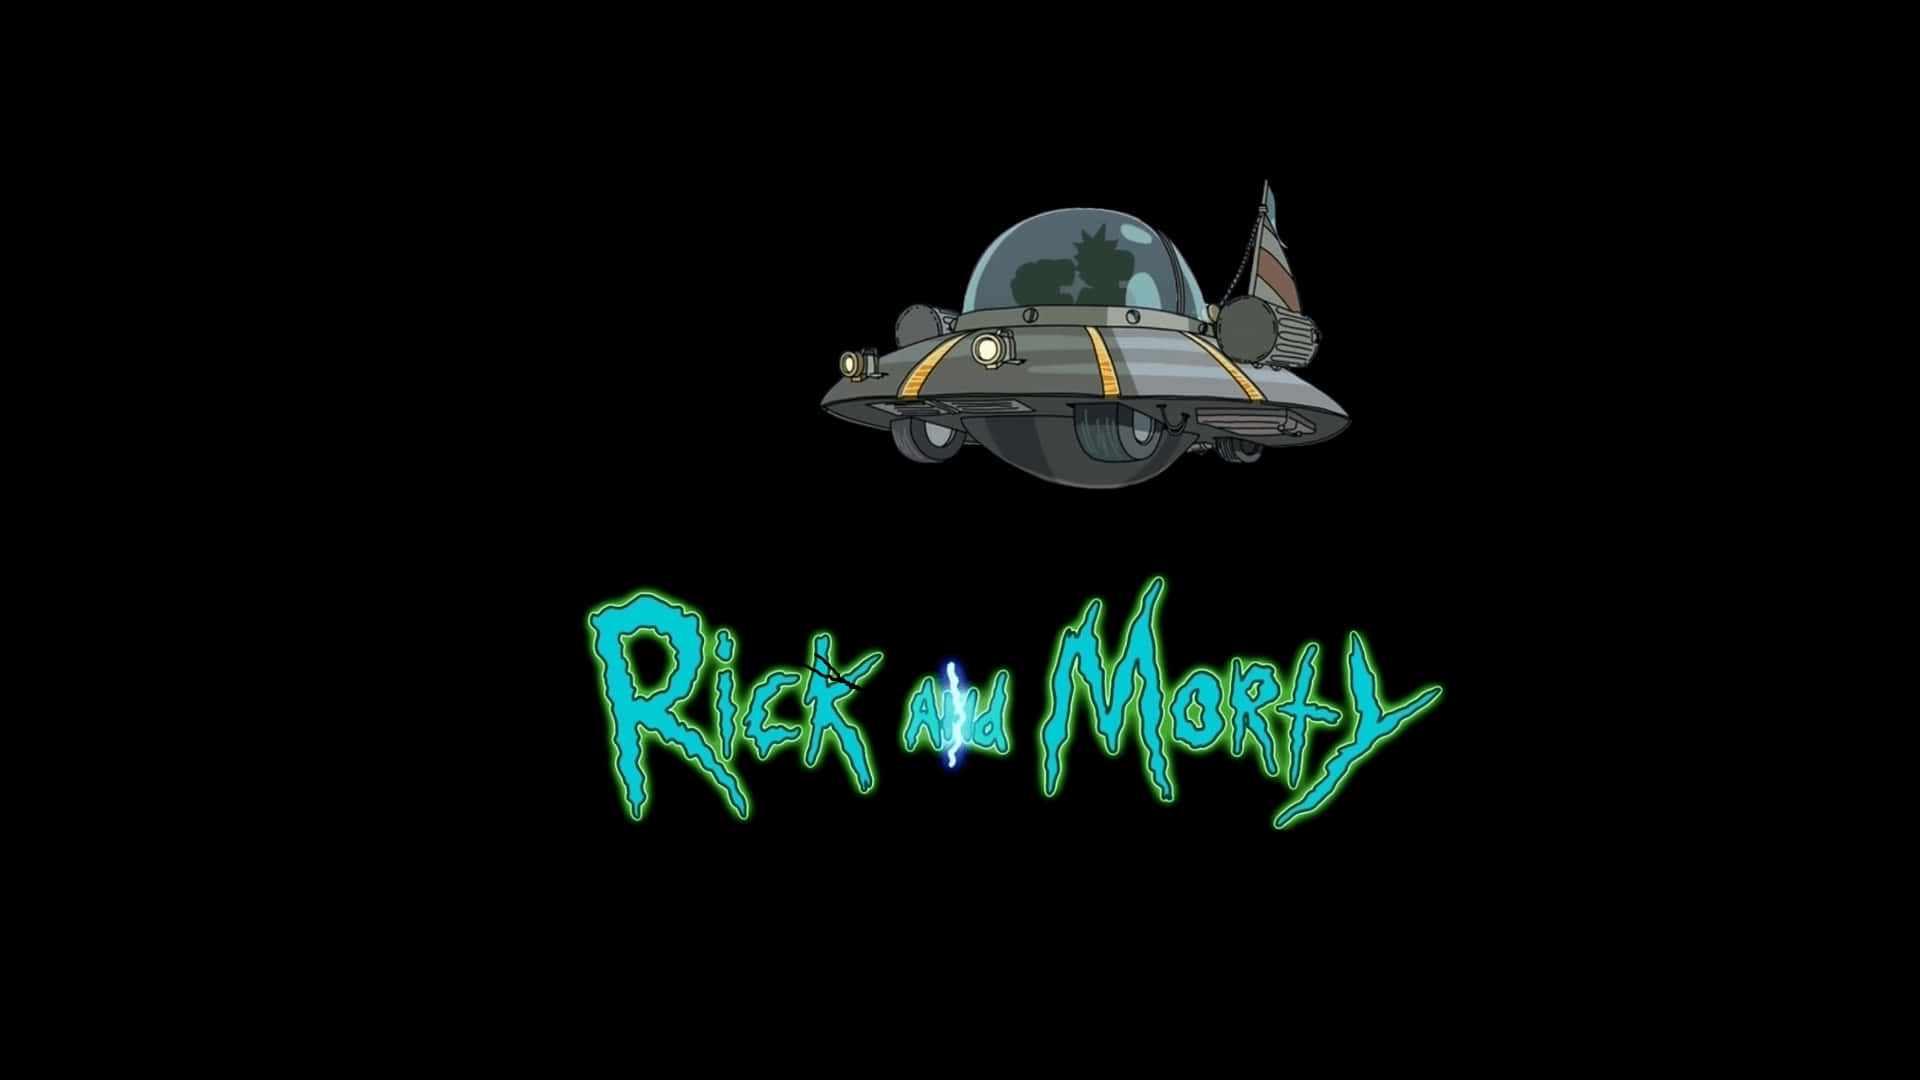 "Explore the Wild West with Rick and Morty in this whacky Backwoods Adventure." Wallpaper